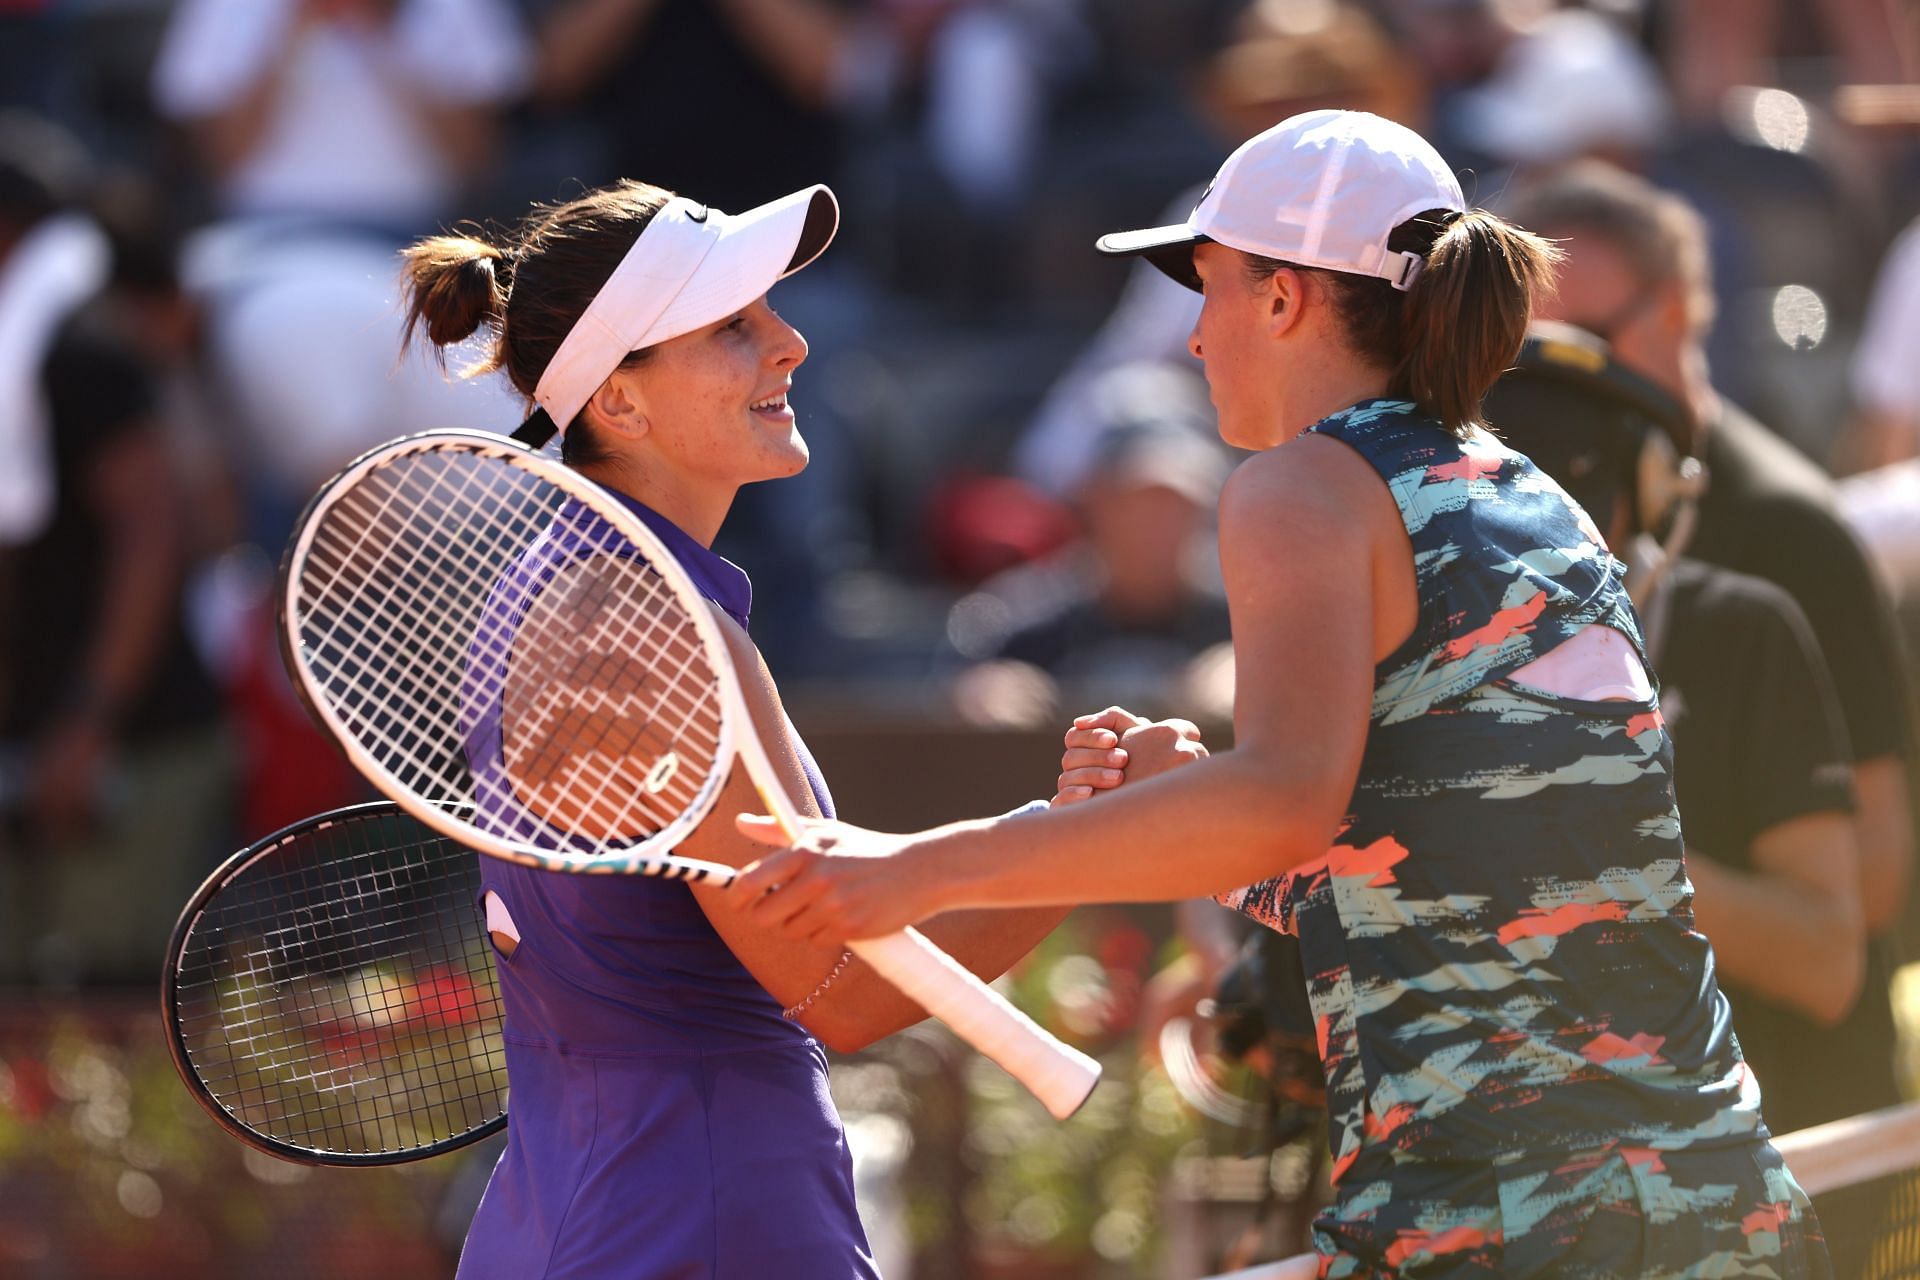 Bianca Andreescu suffered a defeat from surging Iga Swiatek in the quarterfinals of the Italian Open last month